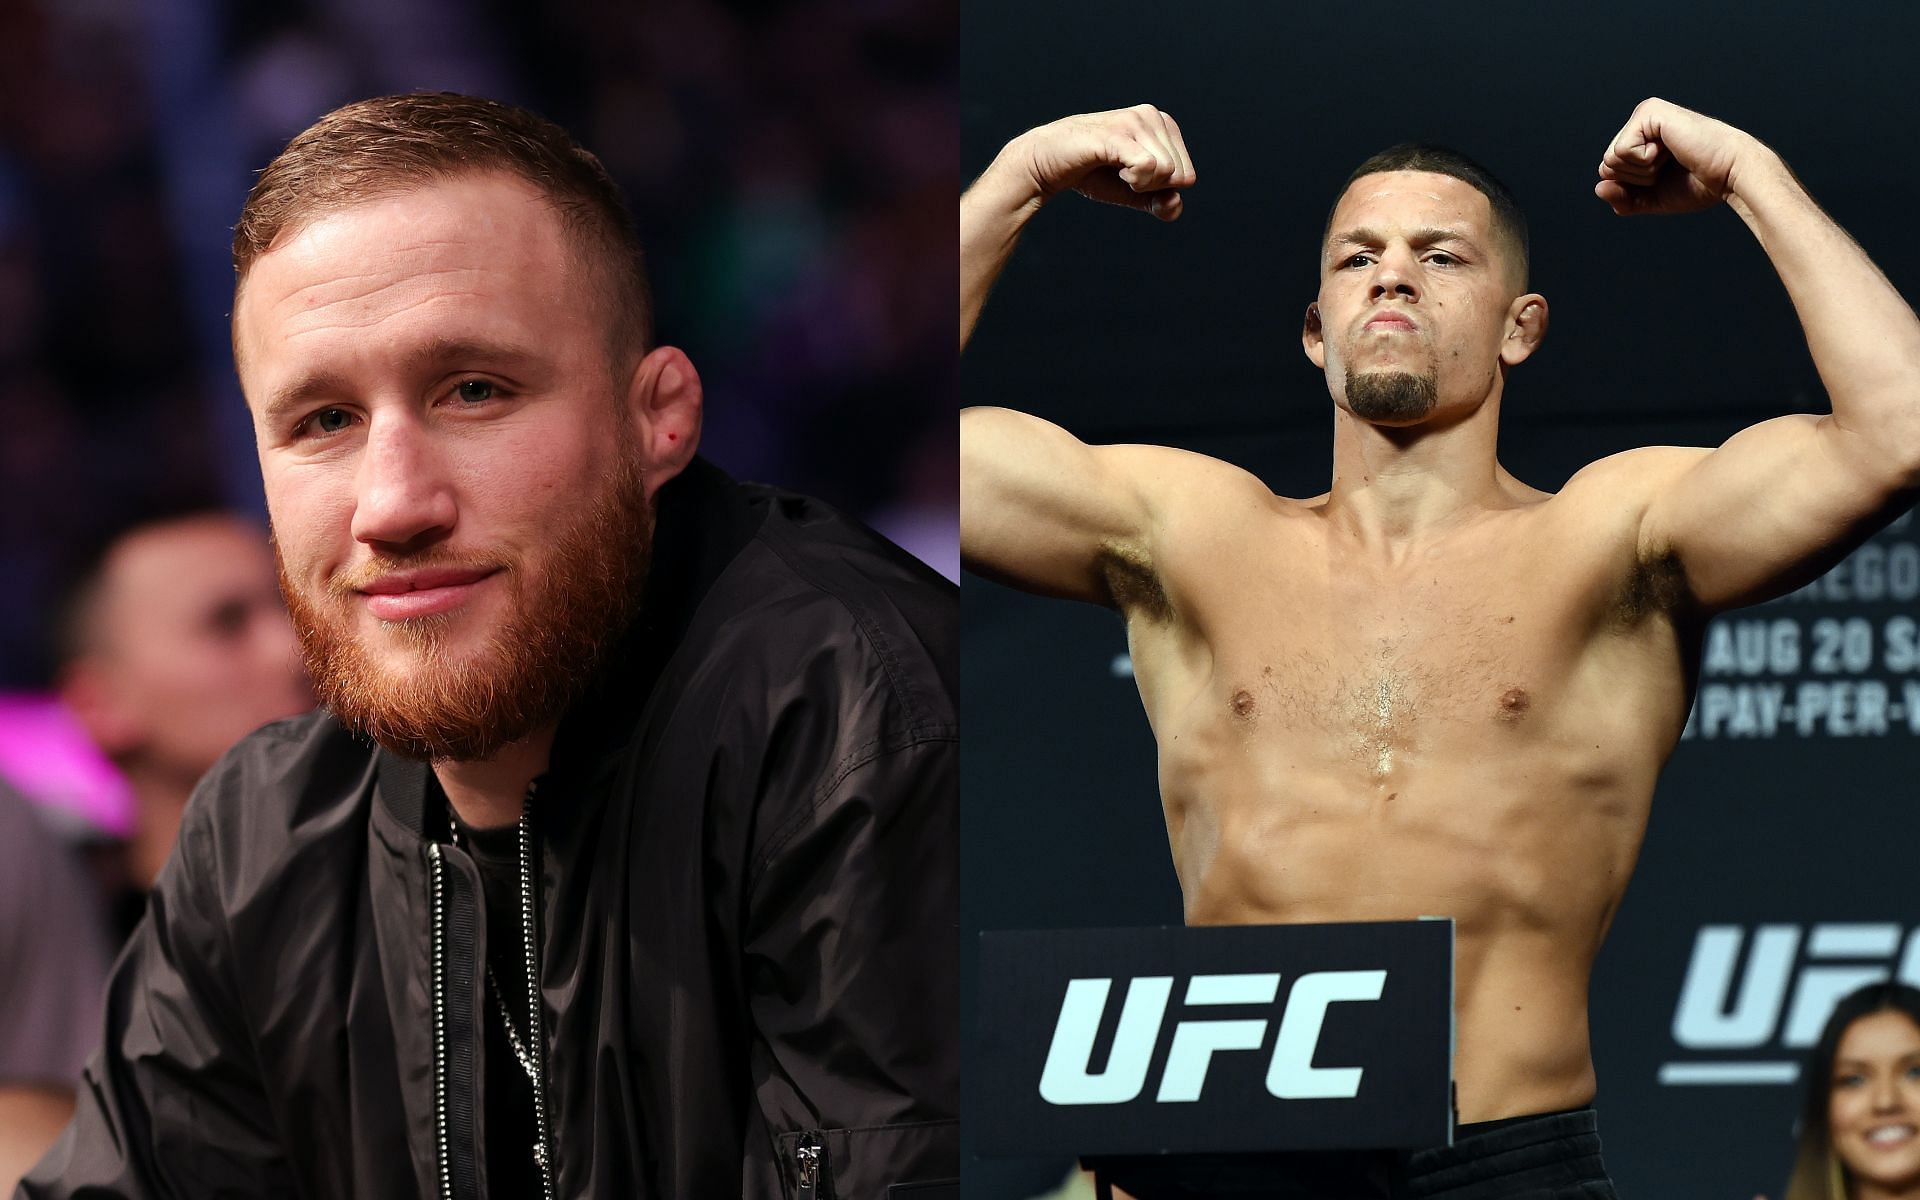 Justin Gaethje (left) and Nate Diaz (right) [ Image Courtesy: Getty Images ]